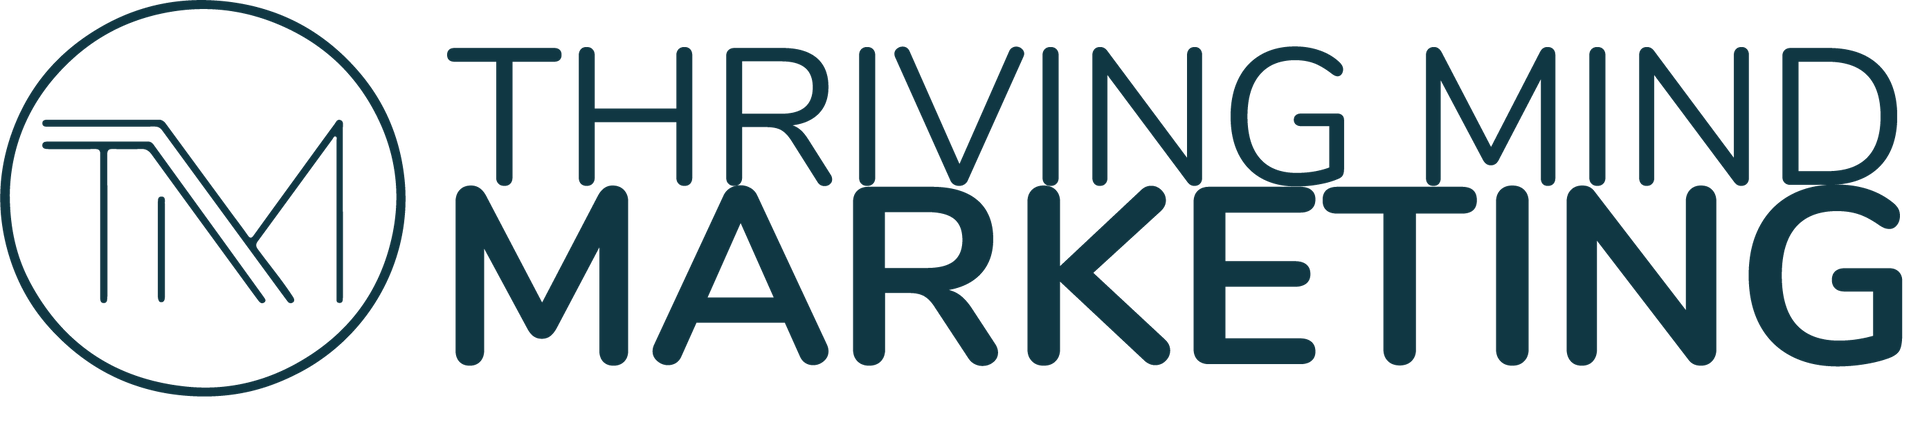 The logo for thriving mind marketing is shown on a white background.